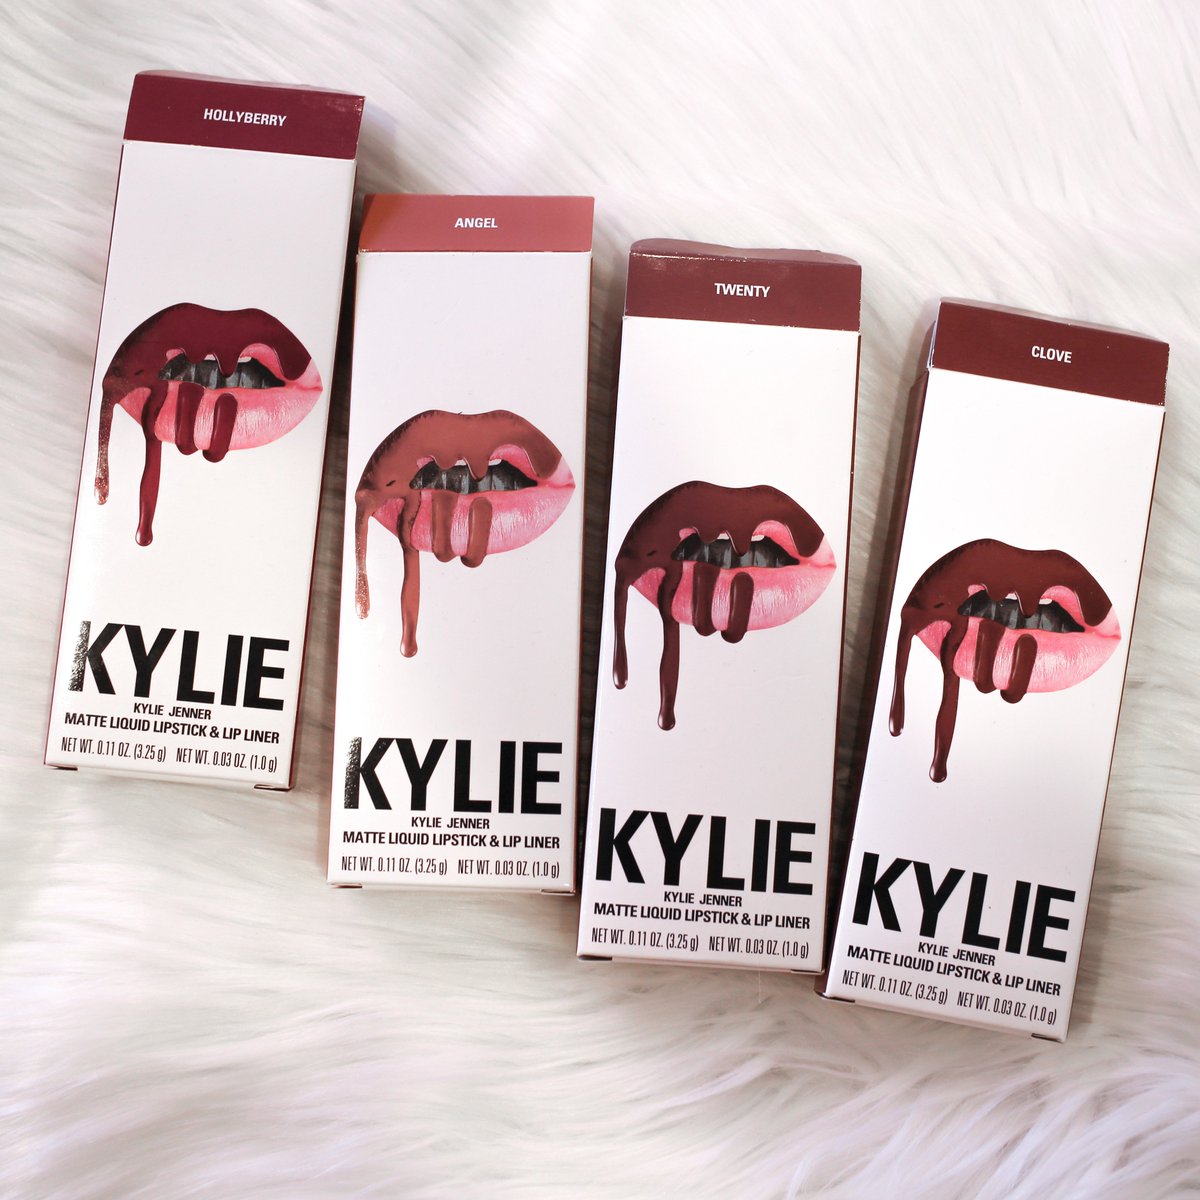 BRINGING BACK YOUR FAVORITES! 4 NEW LIP KITS JUST DROPPED ON https://t.co/6Qgyudbedy ???? https://t.co/kCI6Rbbzj4